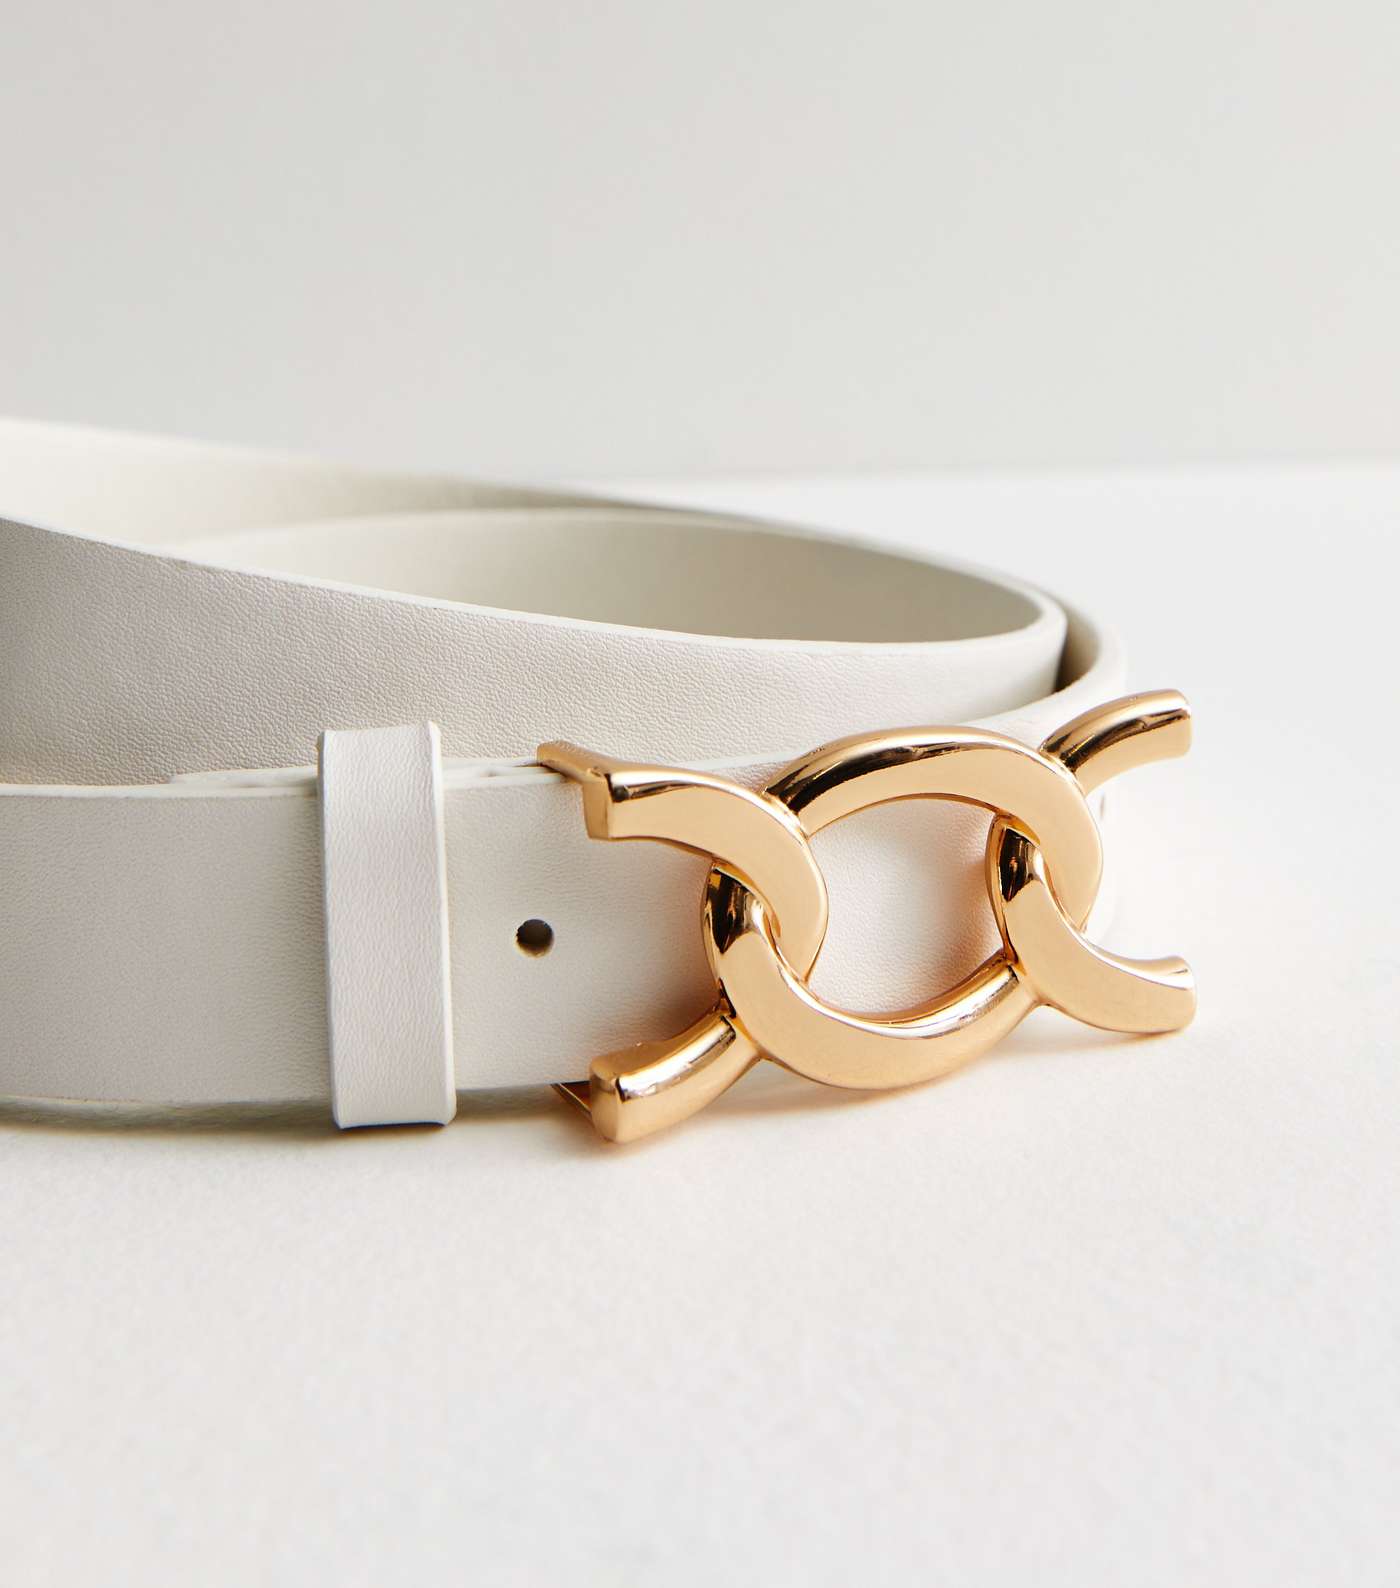 White Leather-Look Link Buckle Belt Image 3